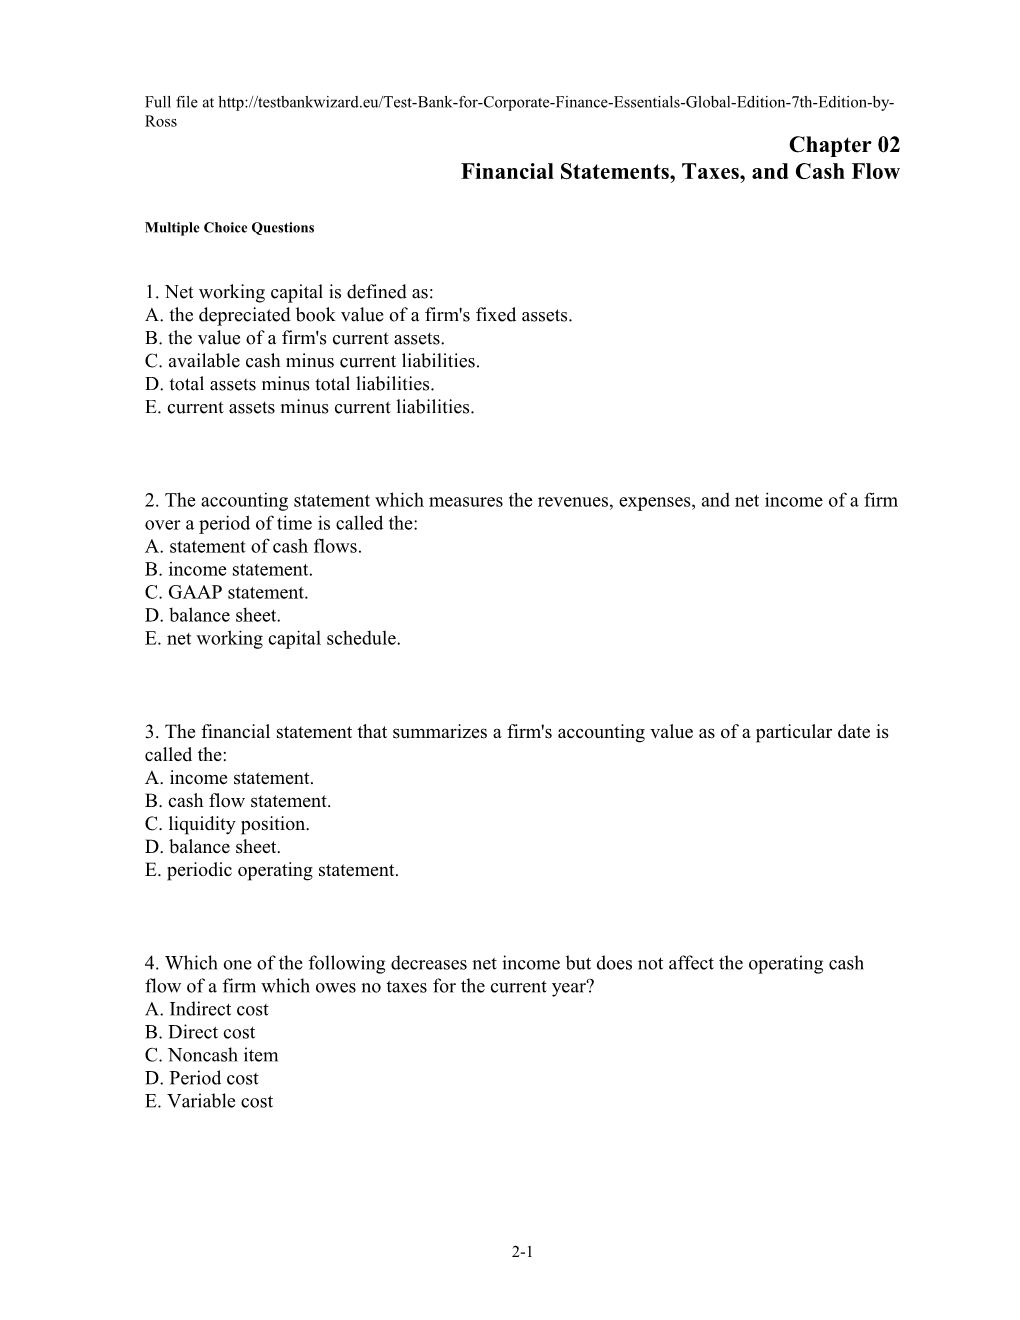 Chapter 02 Financial Statements, Taxes, and Cash Flow